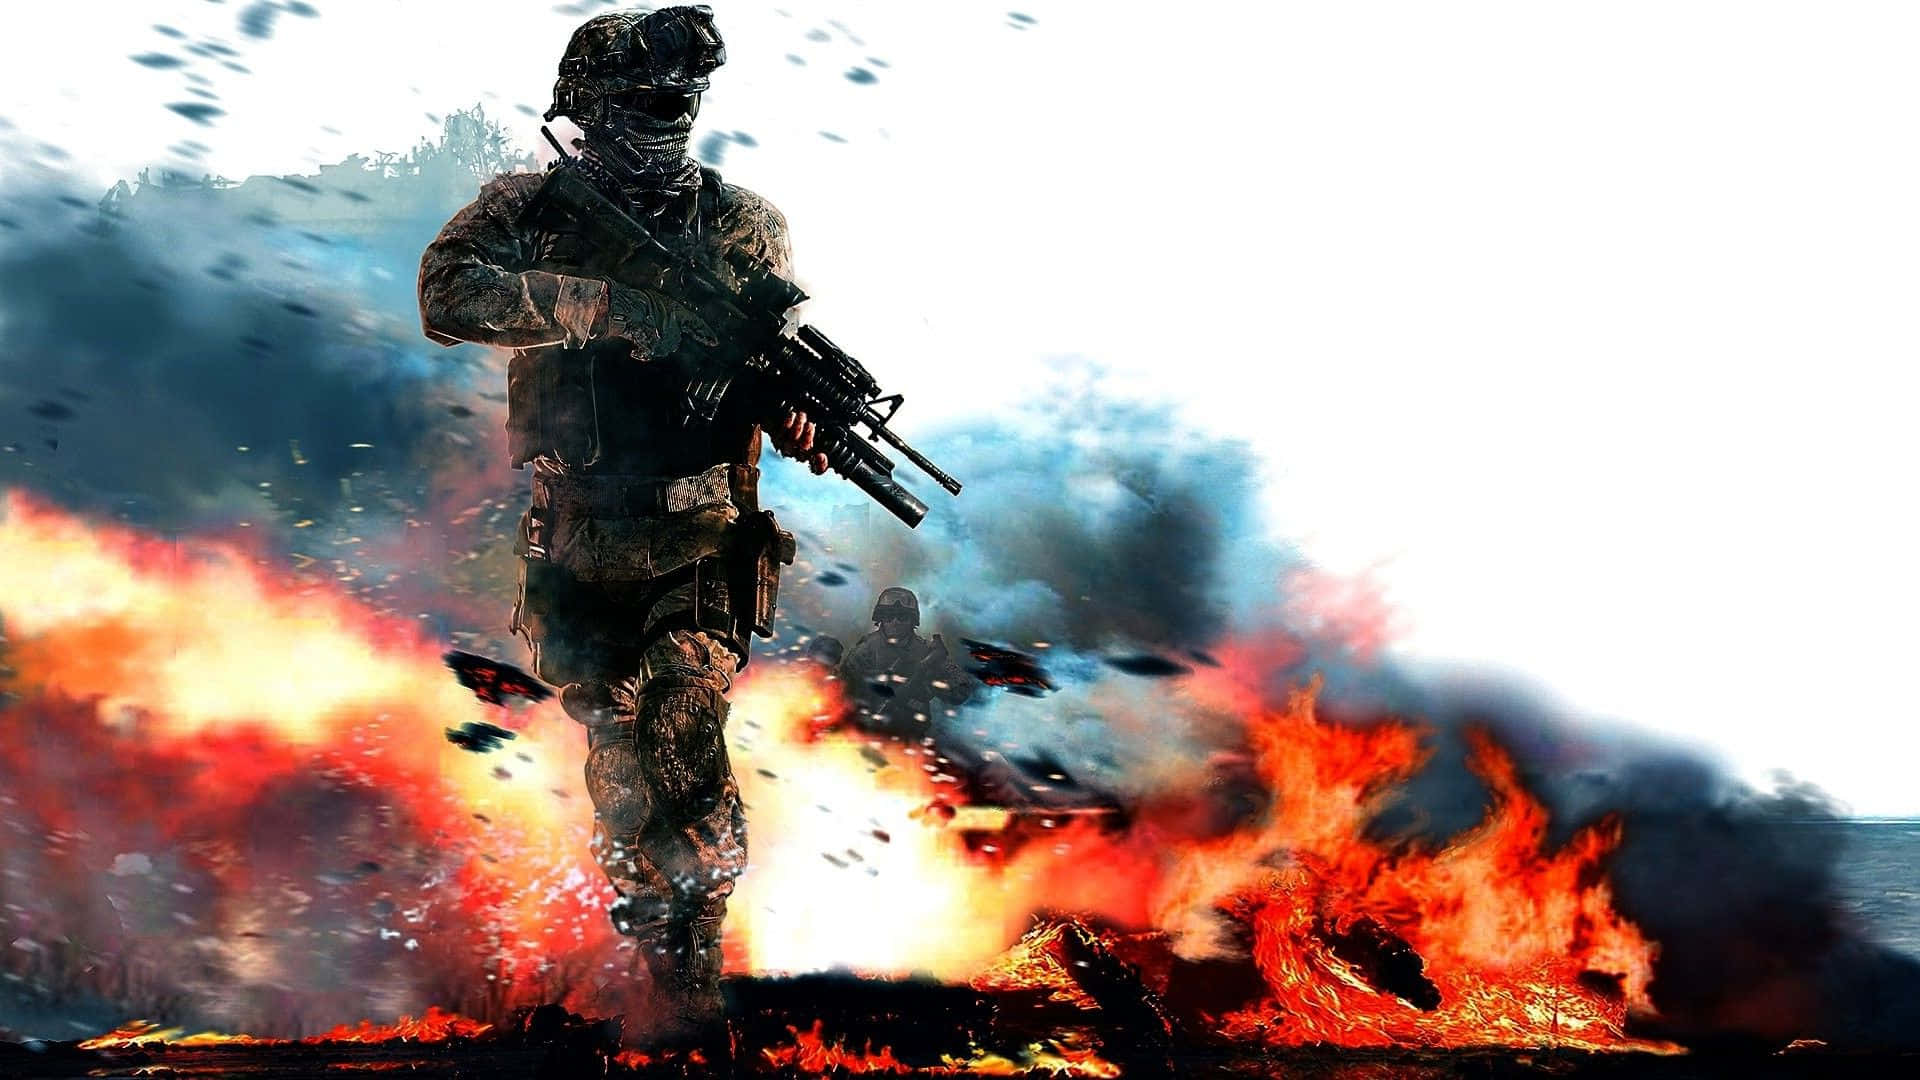 Call Of Duty Soldiers - Intense Battlefield Action Wallpaper